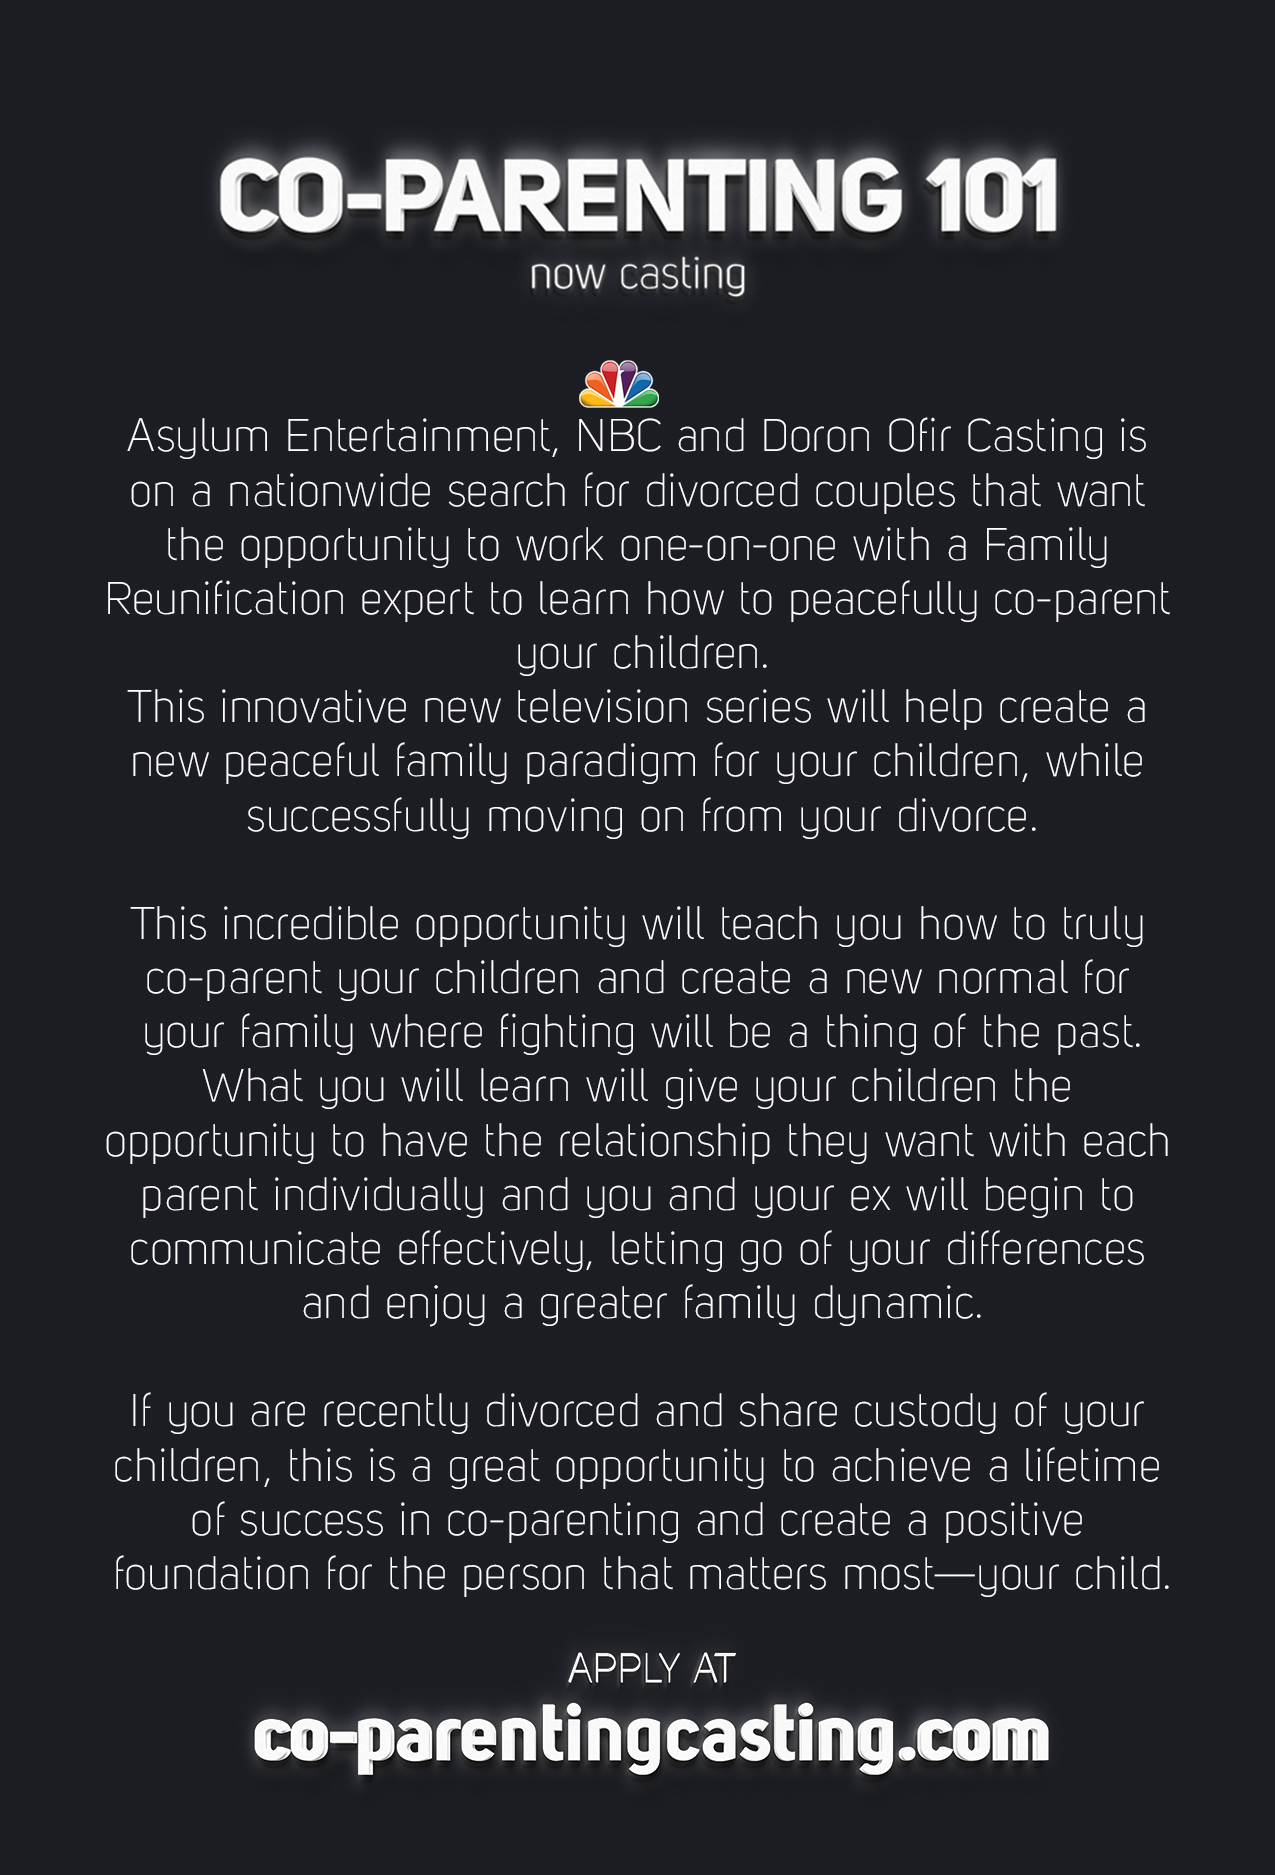 New NBC Reality Show "CoParenting 101" Aims to Help